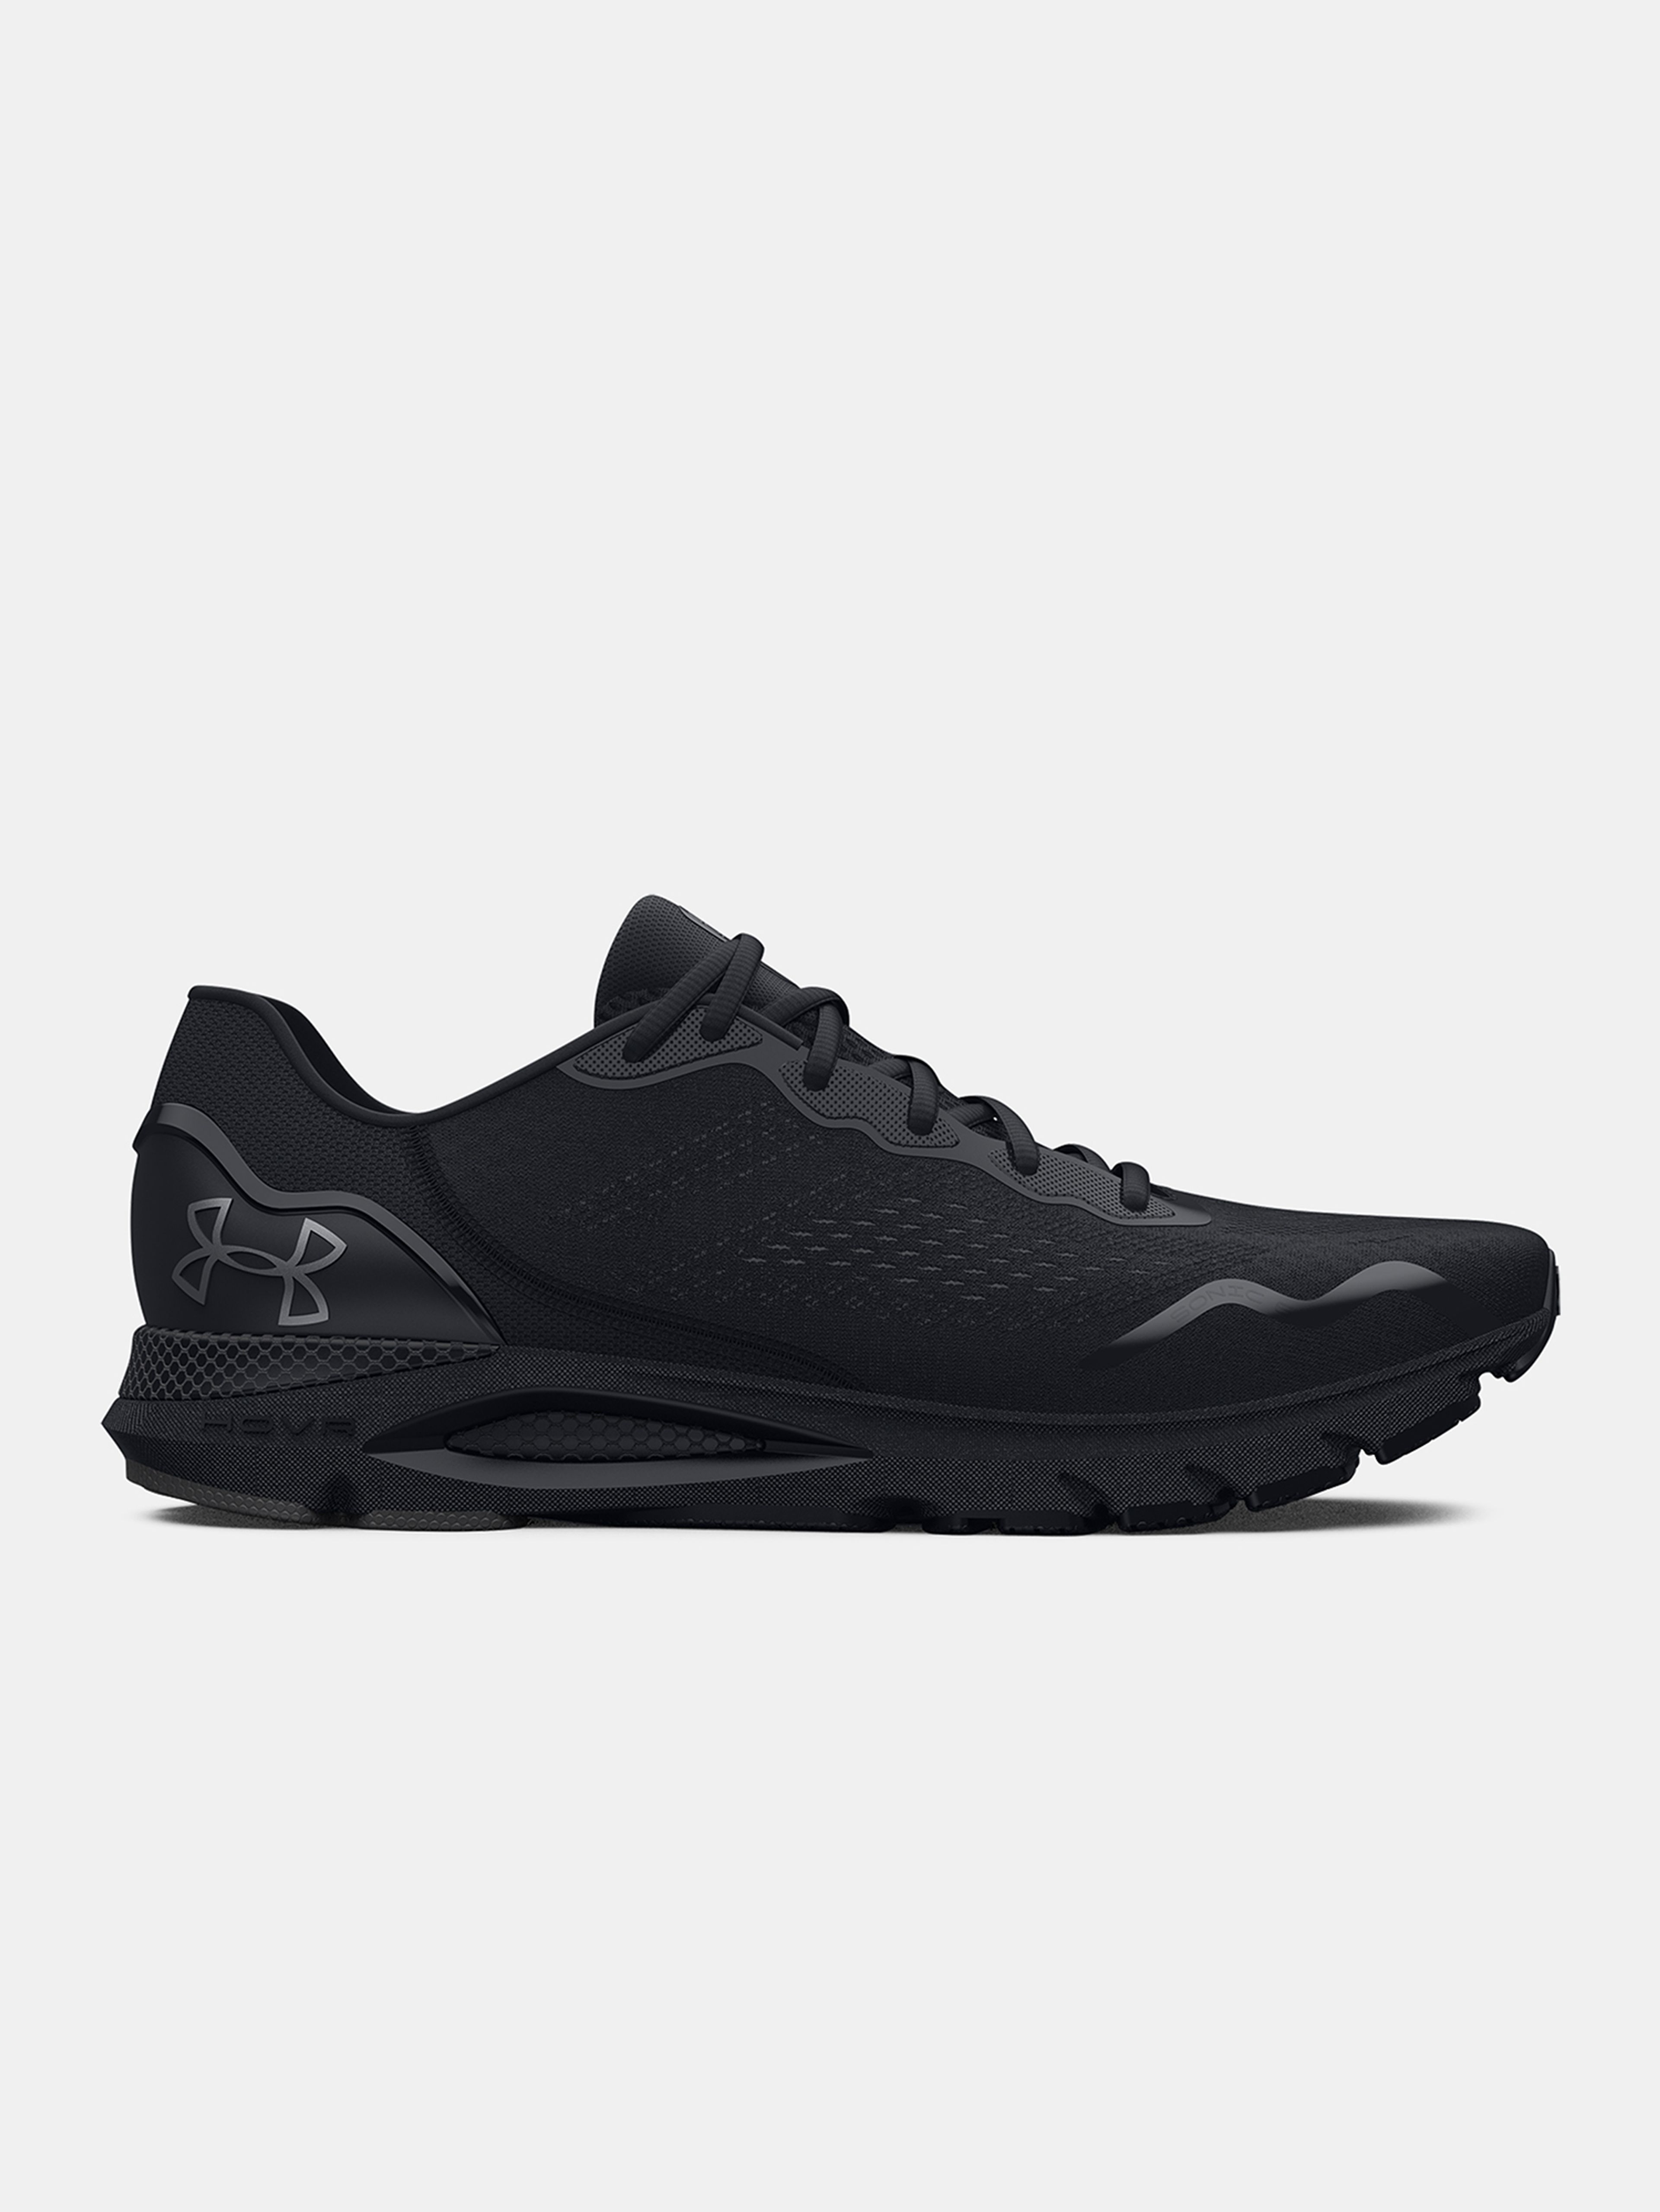 Topánky Under Armour UA HOVR Sonic 6-BLK